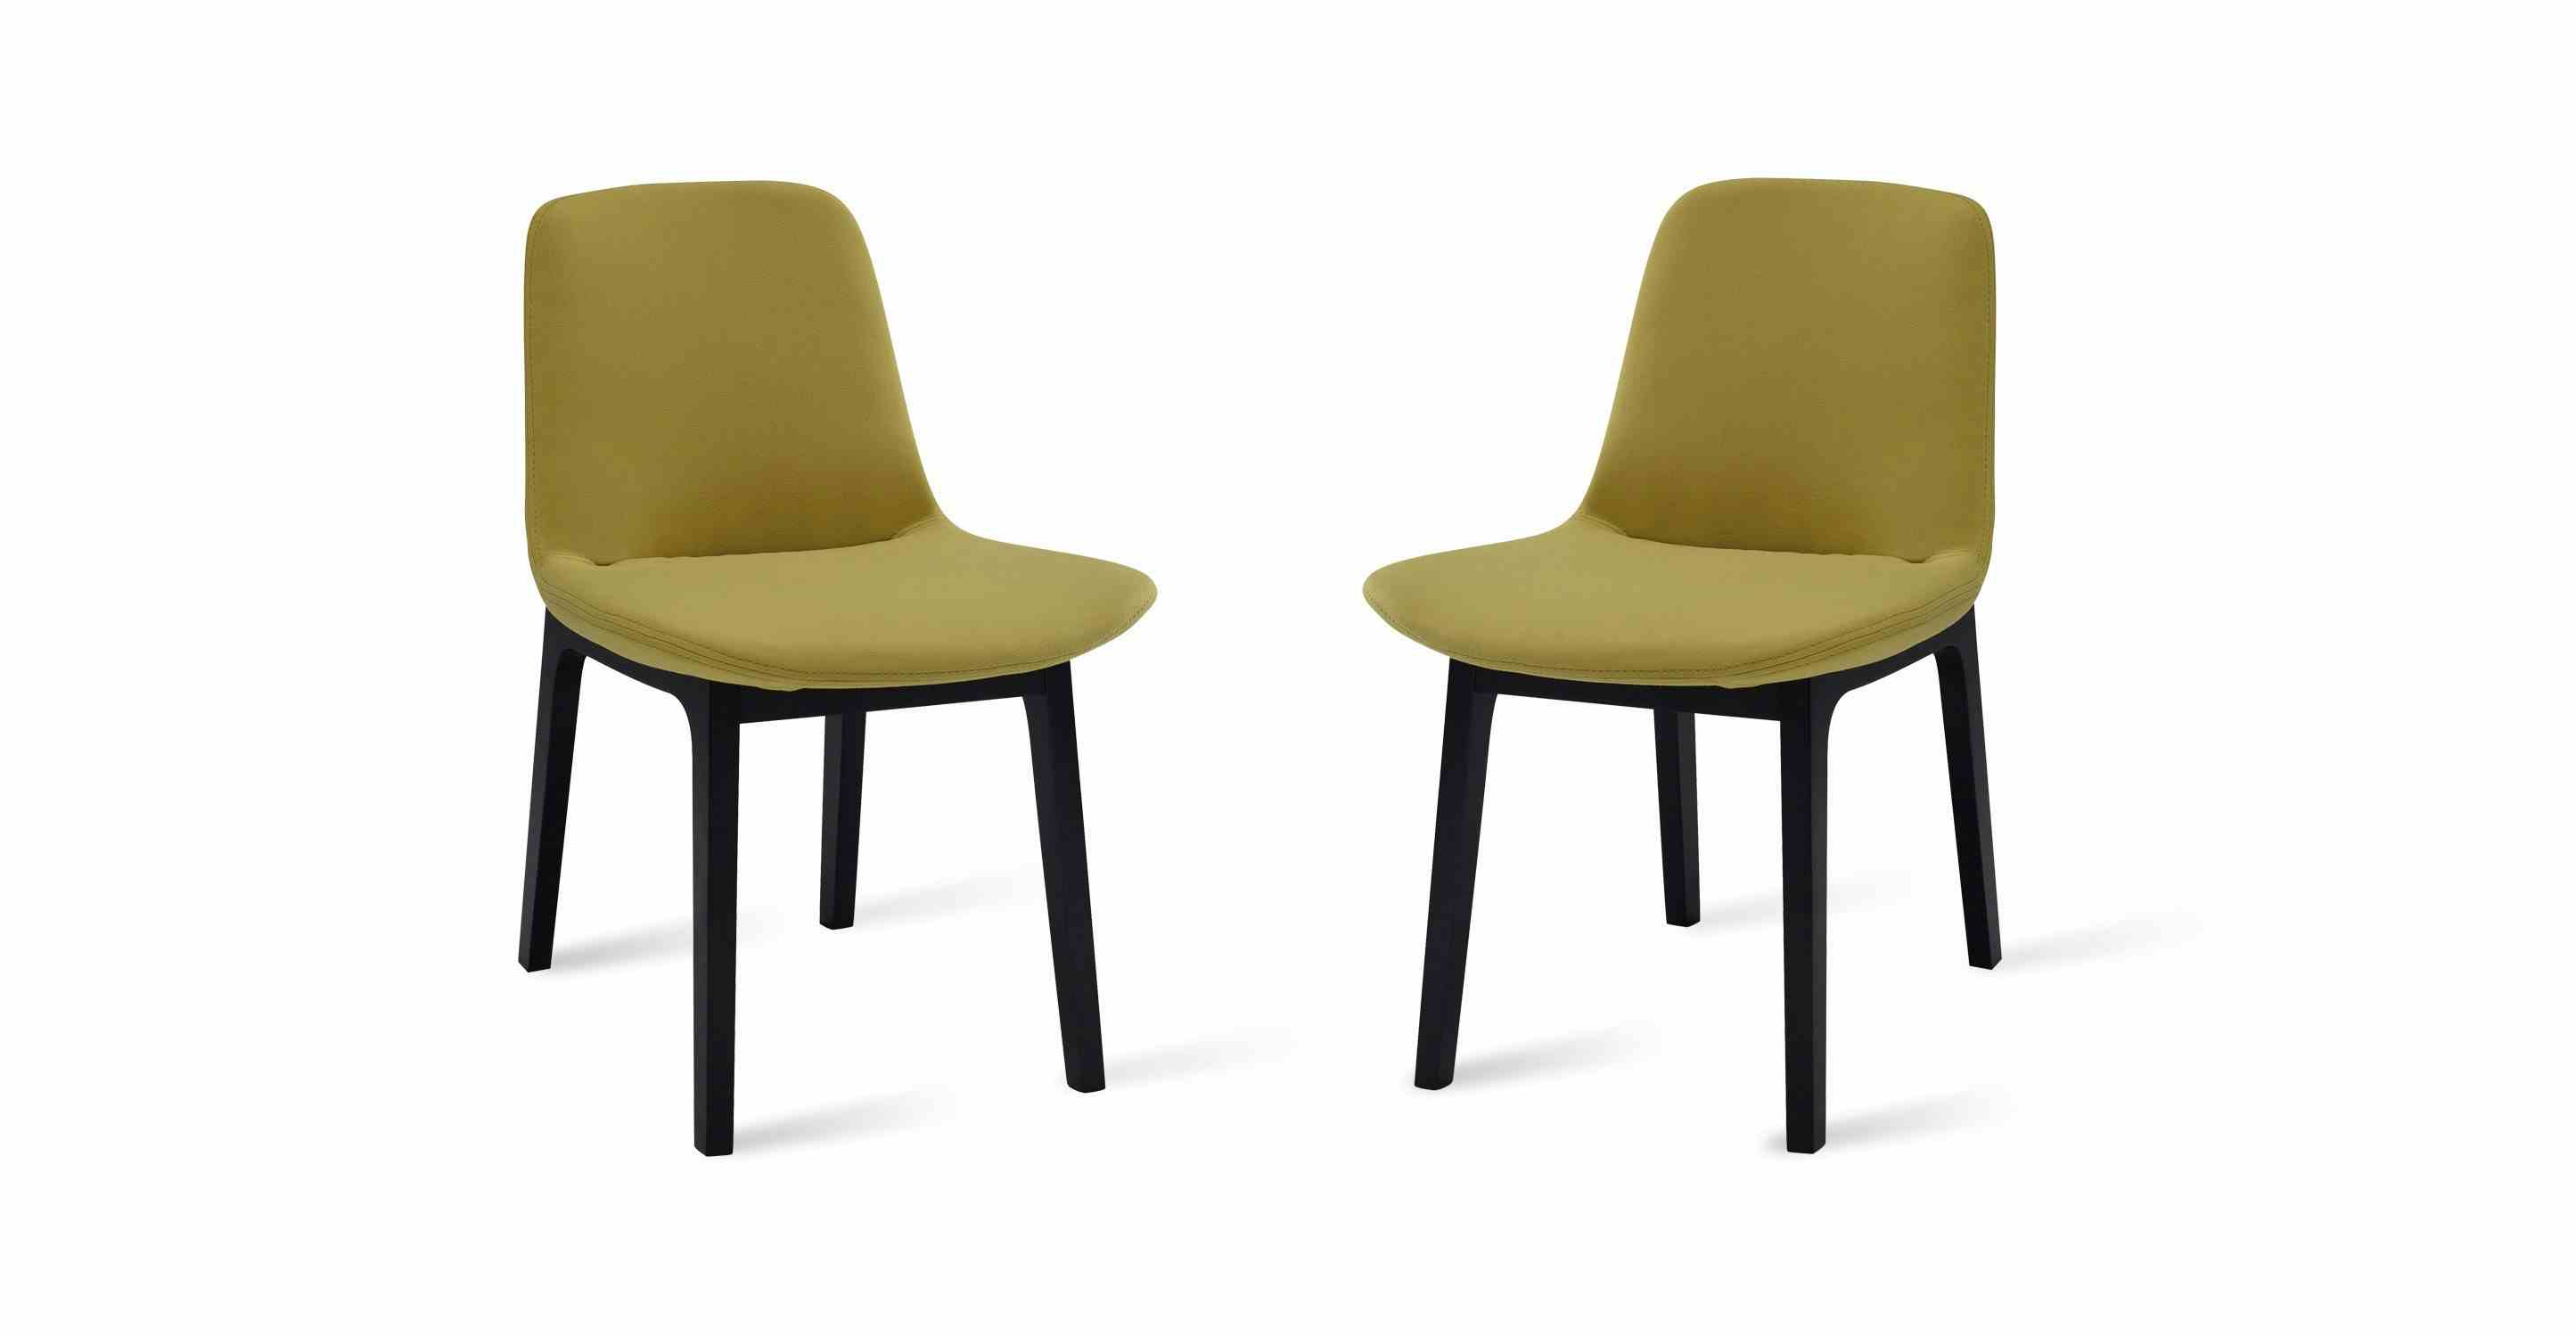 Aurora Pistachio Dining Chair Chairs & Stools Article